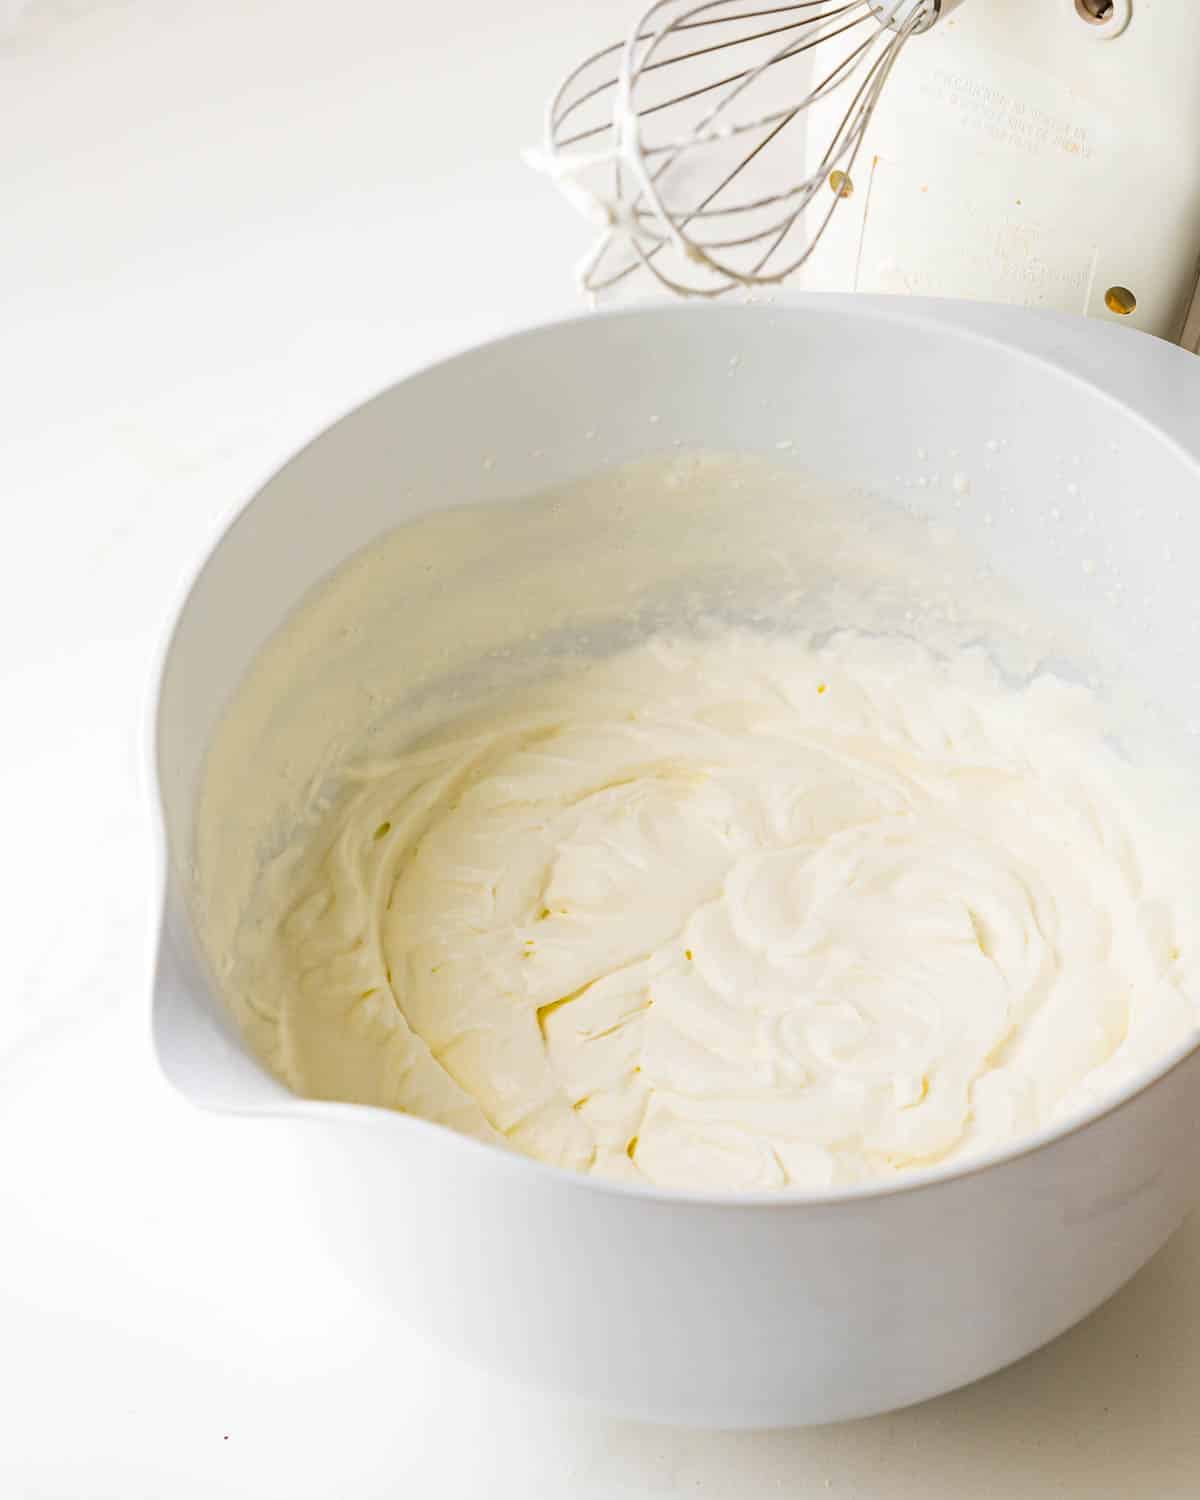 Soft whipped cream for the nougat ice cream.